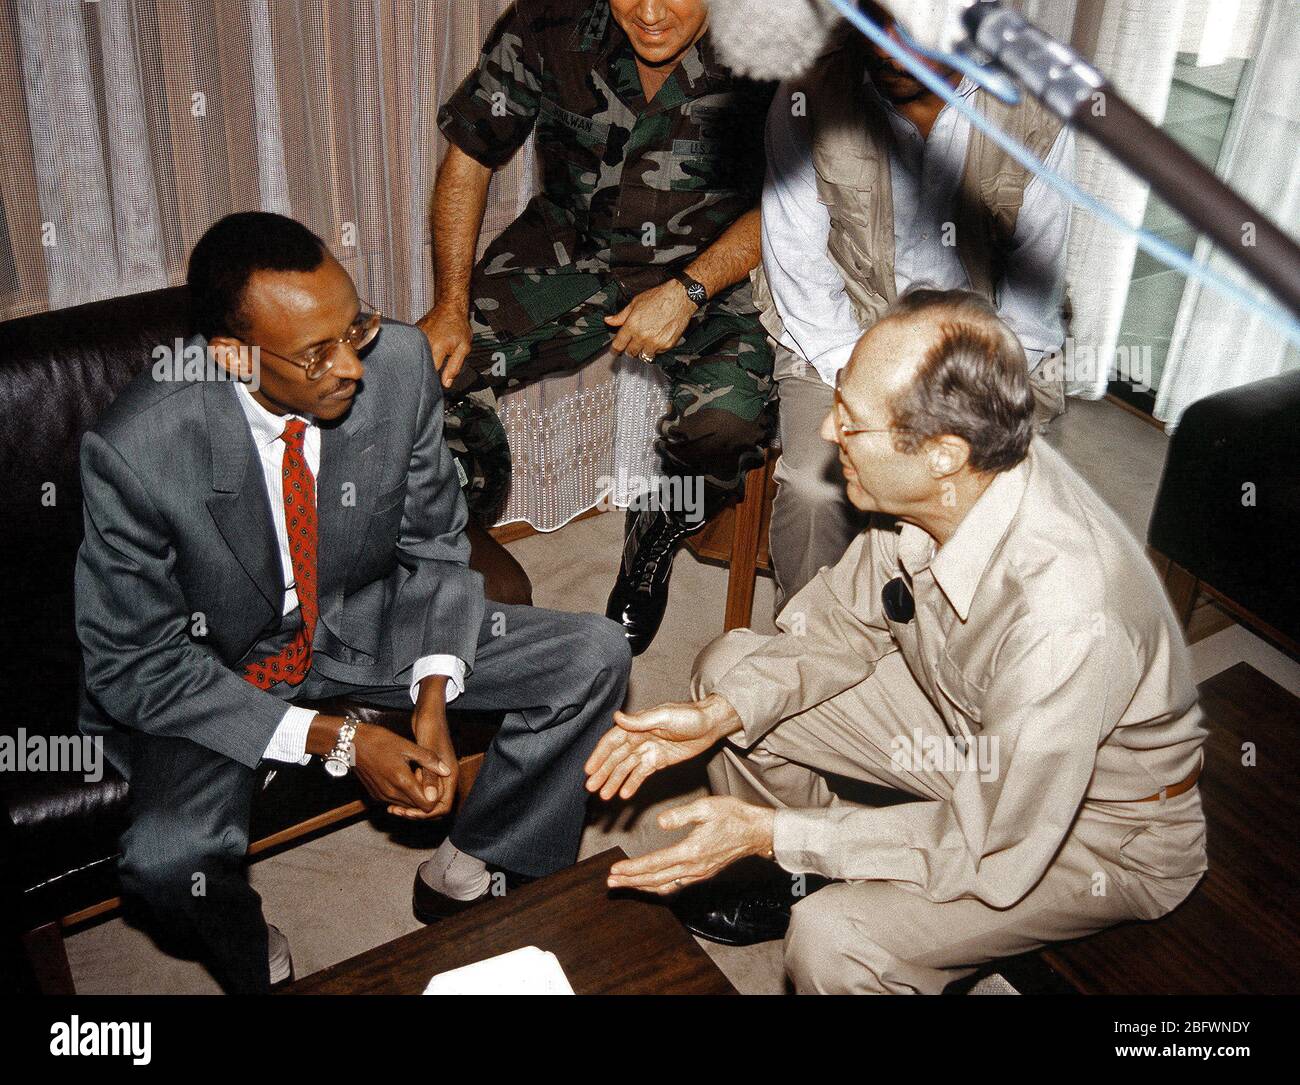 1994 - U.S. Secretary of Defense William Perry discusses the Rwandan civil war and refugee situation with Rwandan President Paul Kagami during the secretary's visit to Kigali. Stock Photo